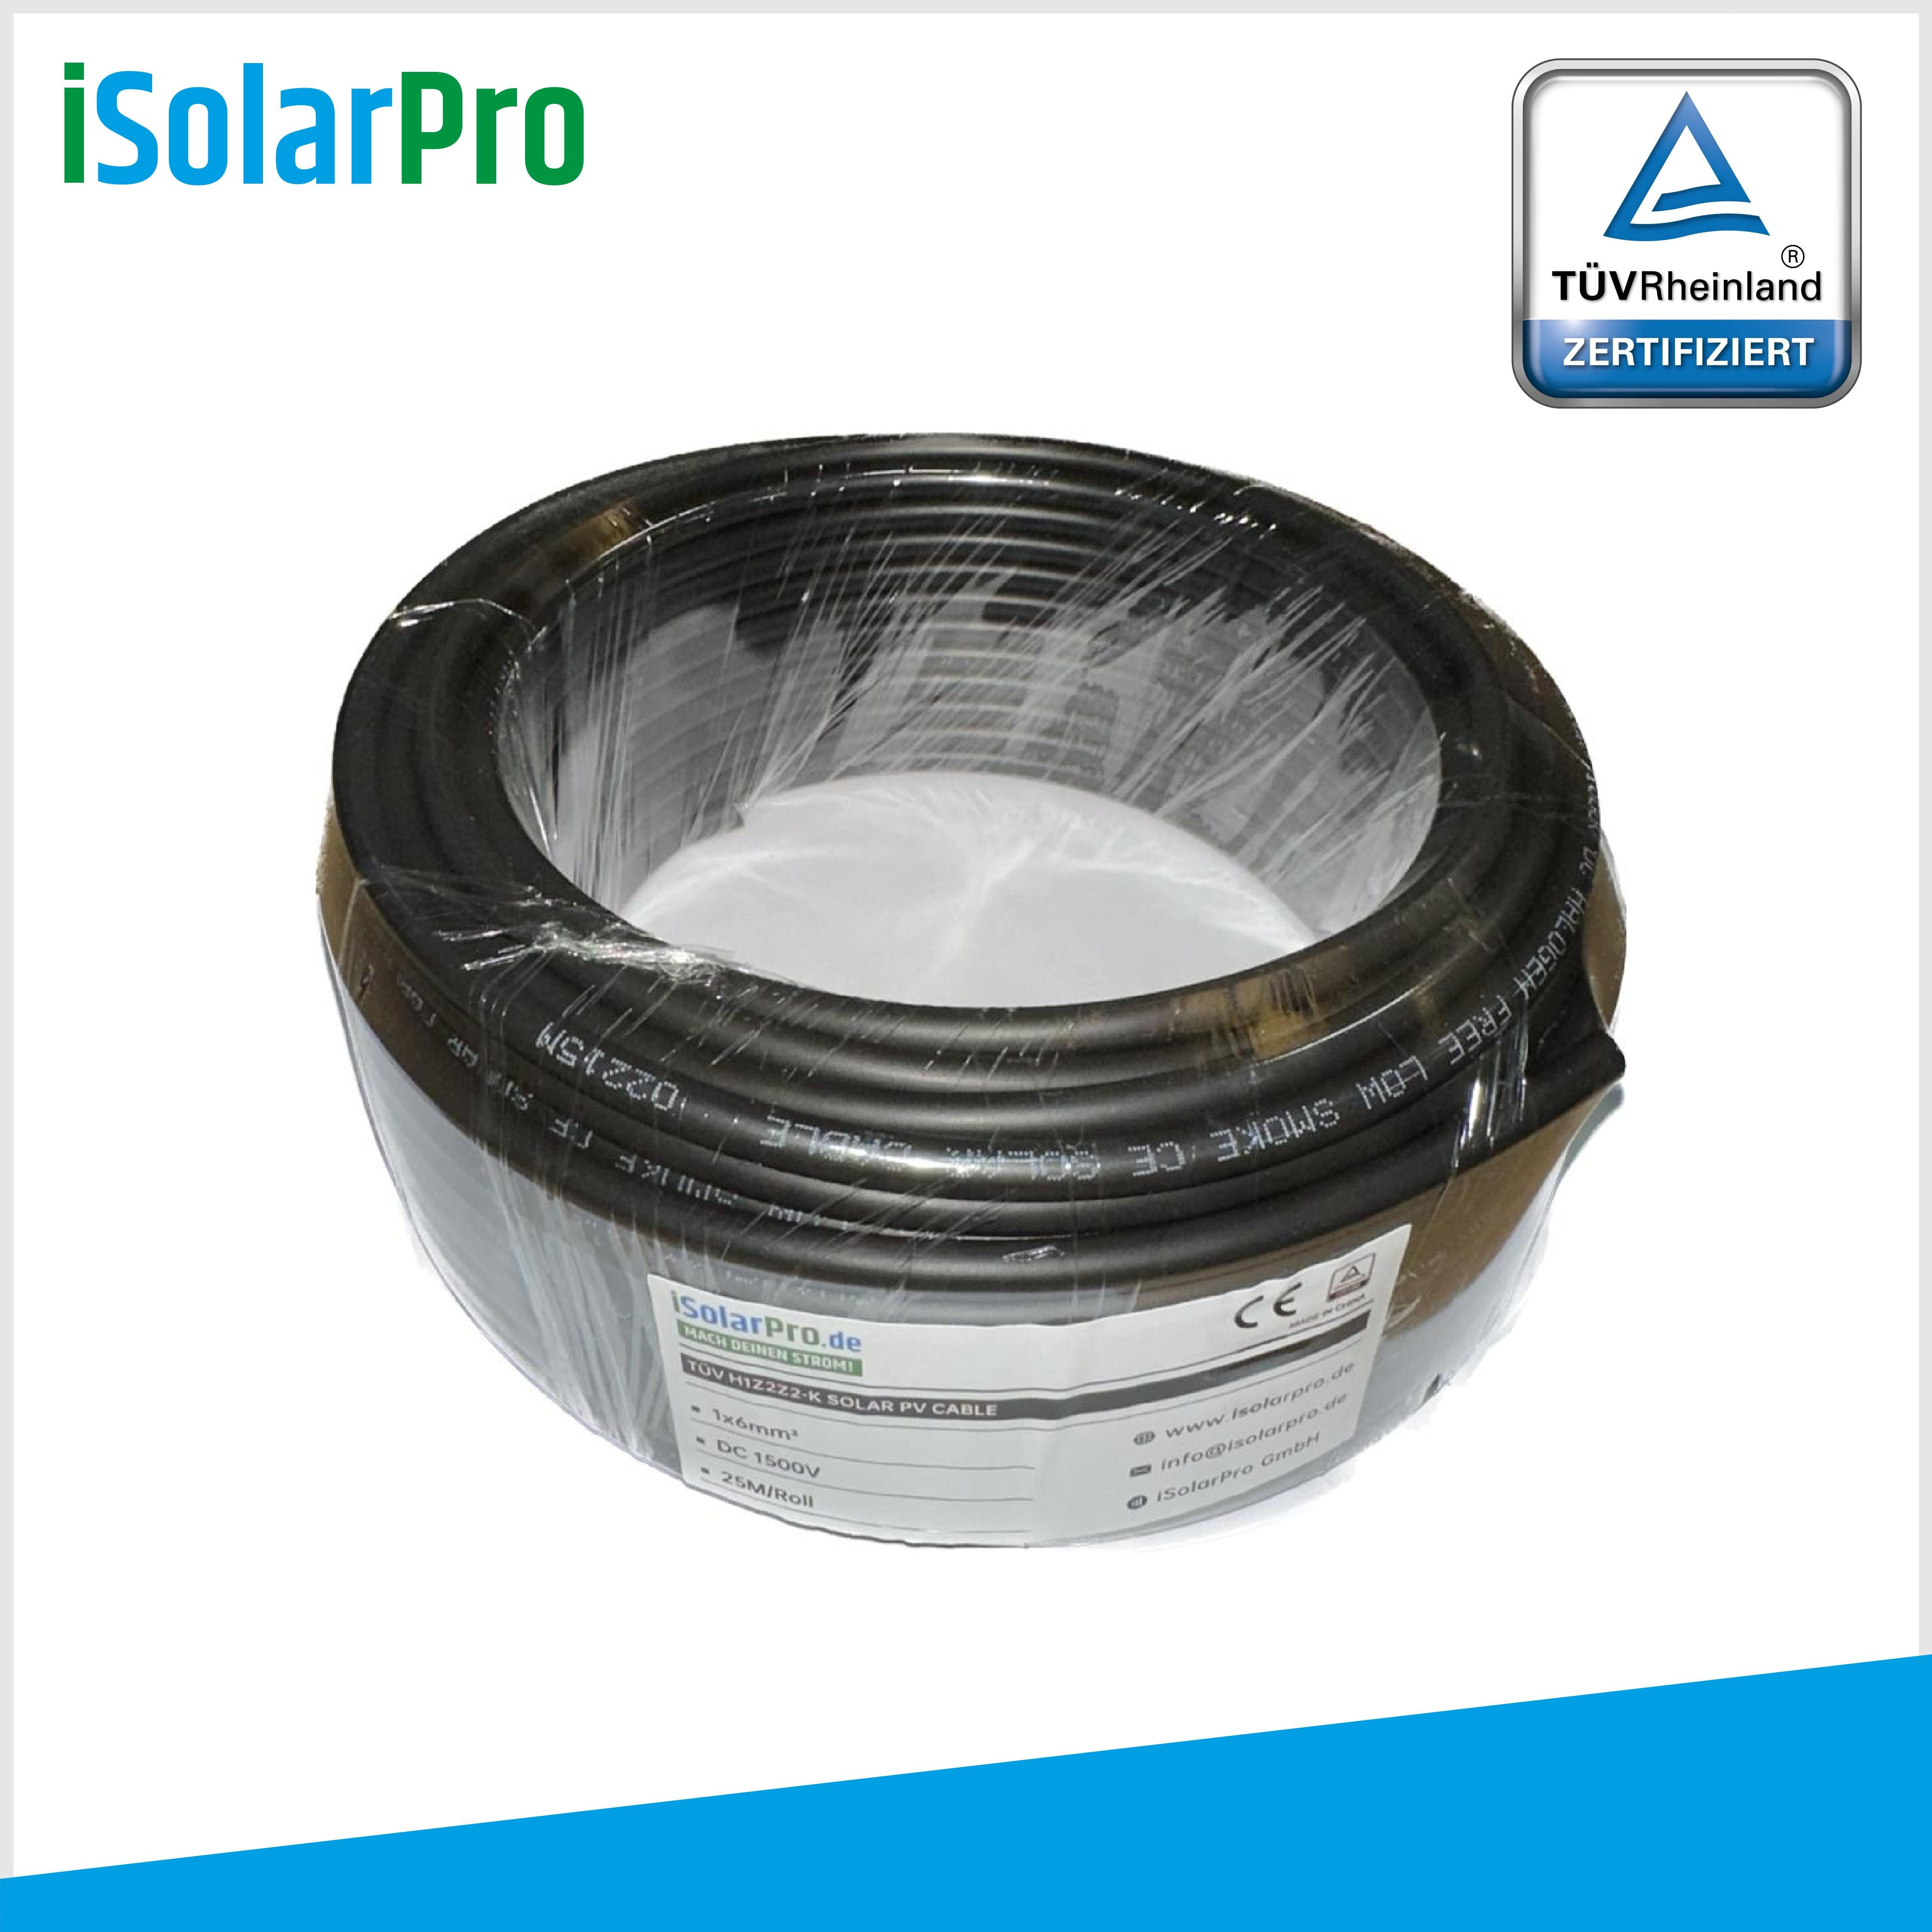 25m solar cable 6 mm² photovoltaic cable for PV systems black